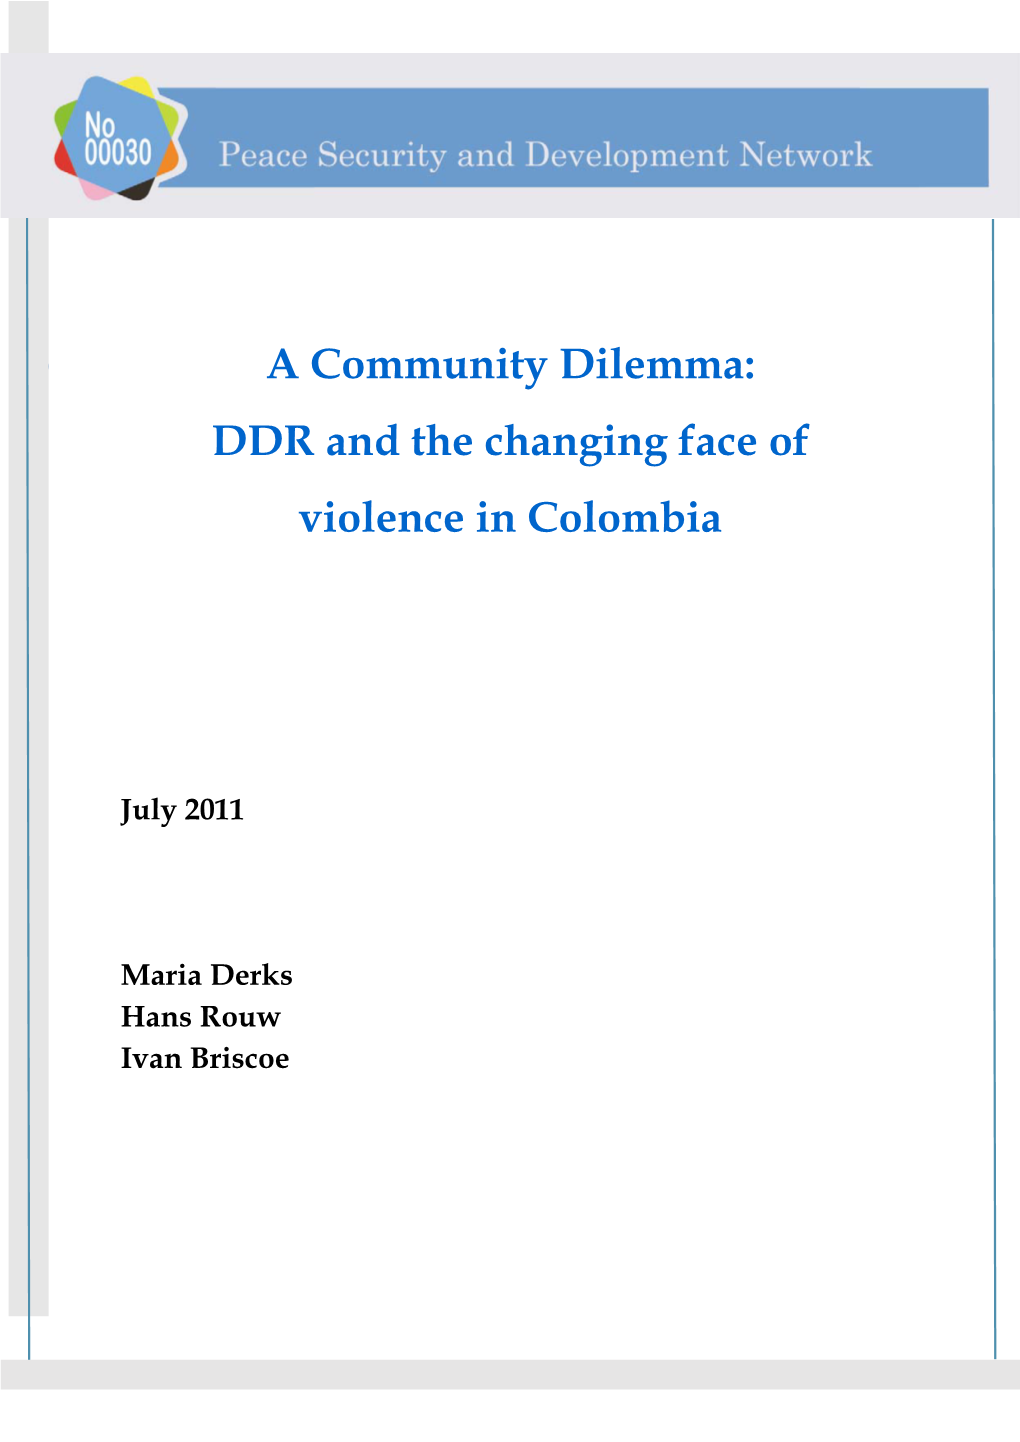 DDR and the Changing Face of Violence in Colombia